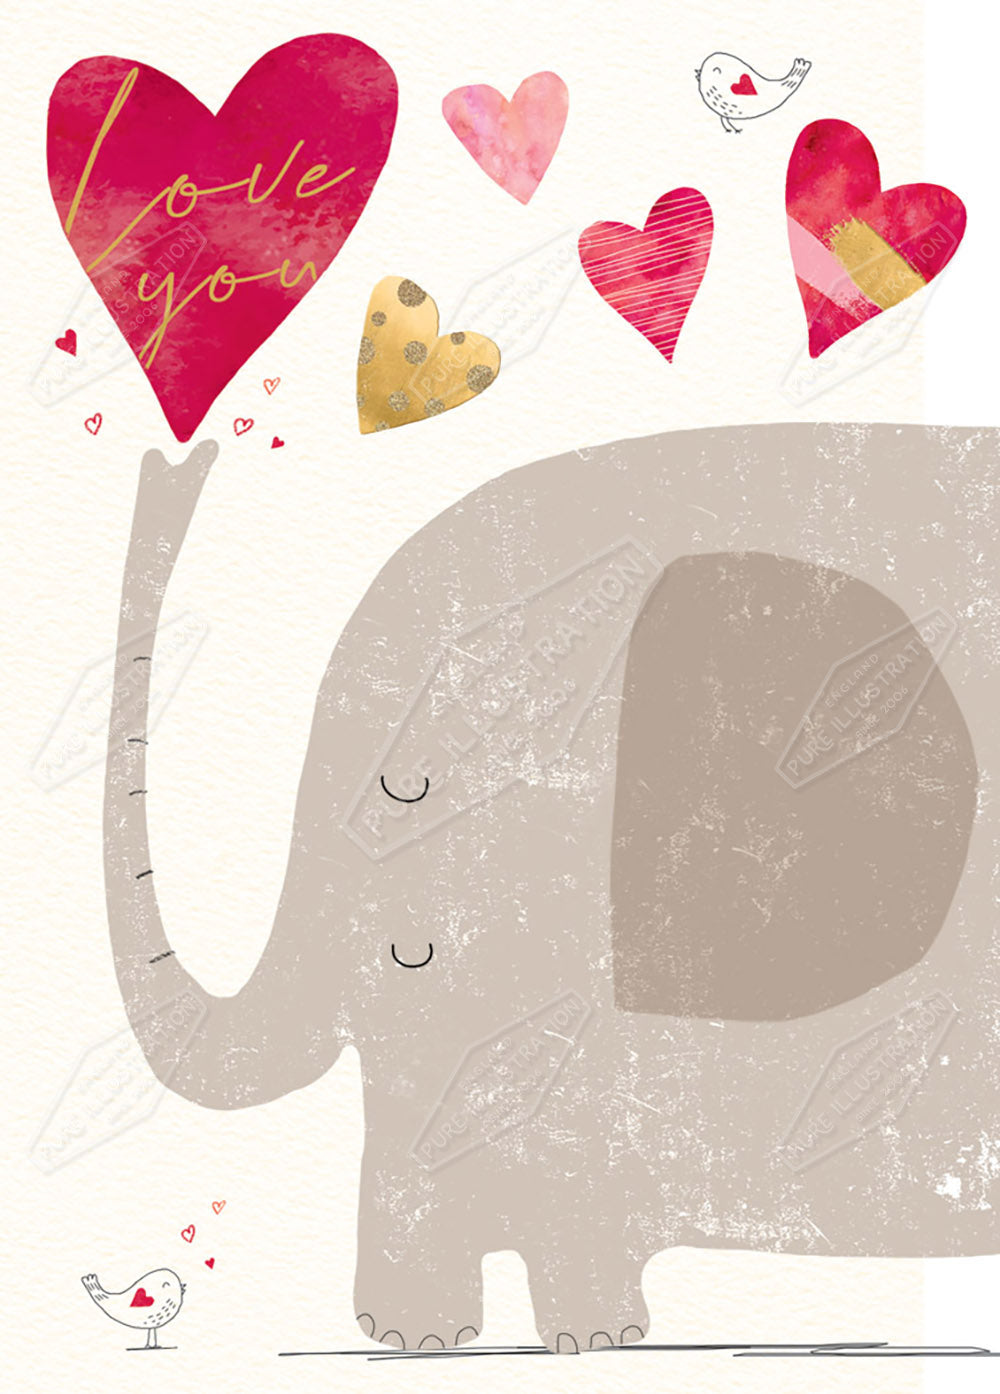 Anniversary / Valentines Greeting Card Design by Cory Reid - Pure Art Licensing Agency & Surface Design Studio